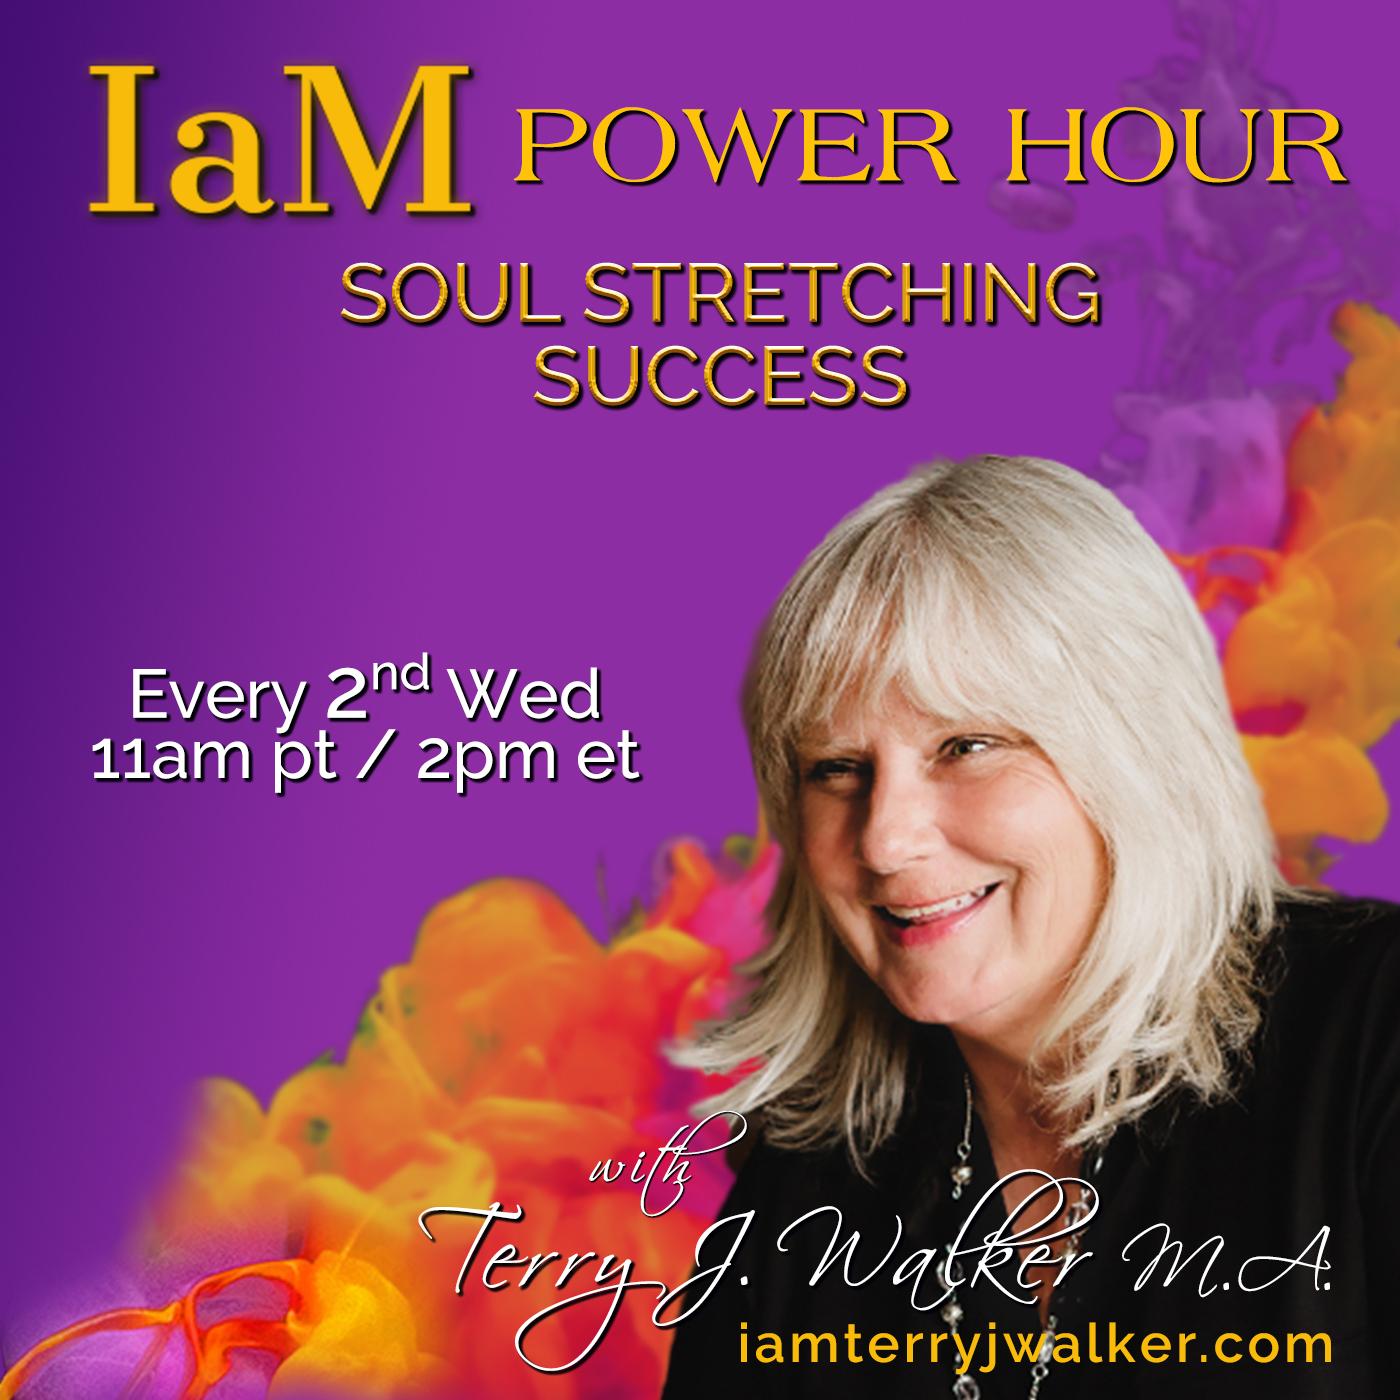 I AM Power Hour: Soul Stretching Success with Terry J. Walker